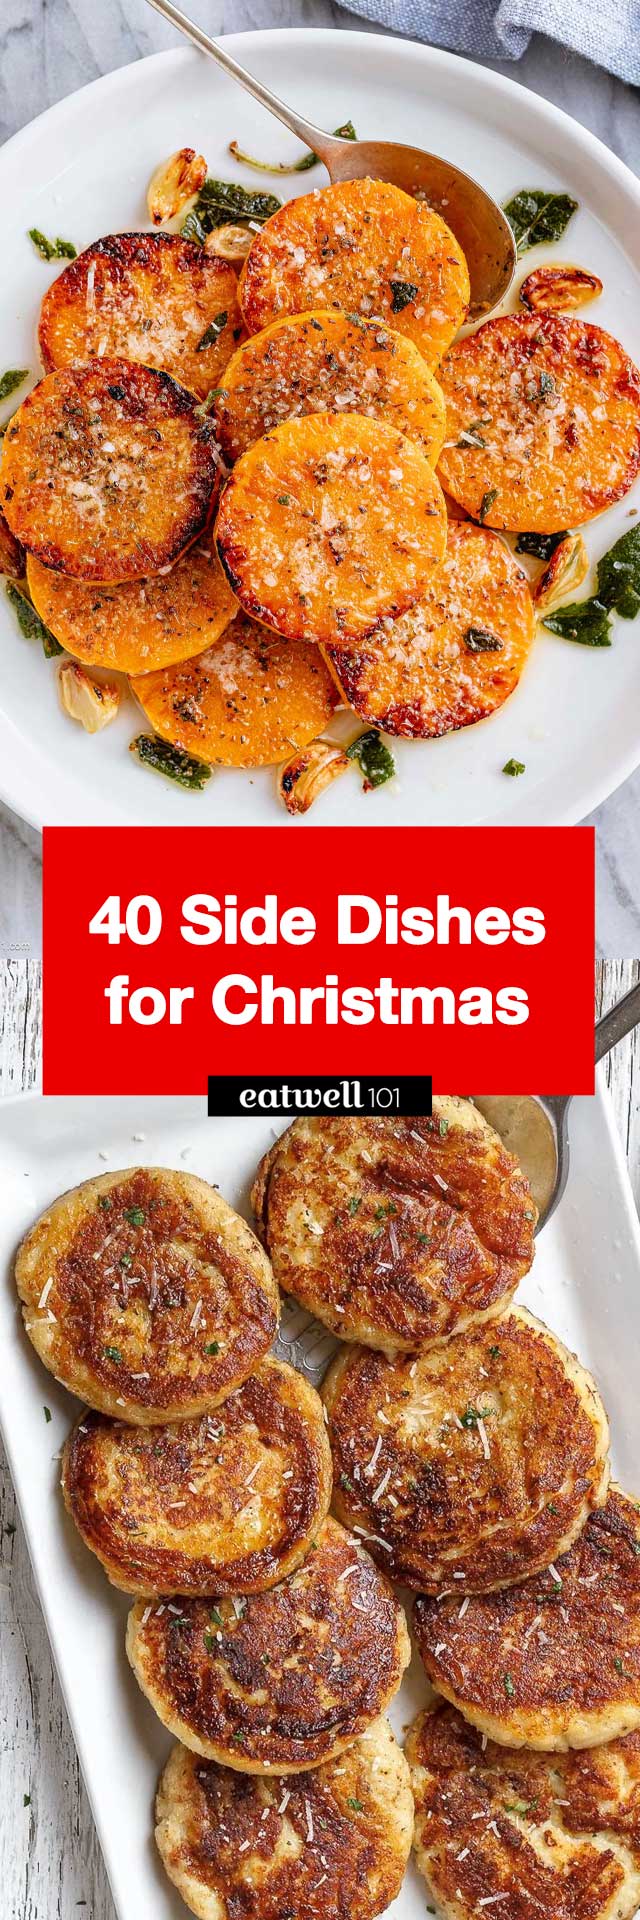 40 Easy Recipes Ideas for Christmas Side Dishes - #christmas #recipes #eatwell101 - Enjoy our quick and easy side dishes for Christmas. Including recipes for vegetable side dishes, potato side dishes, and many more!